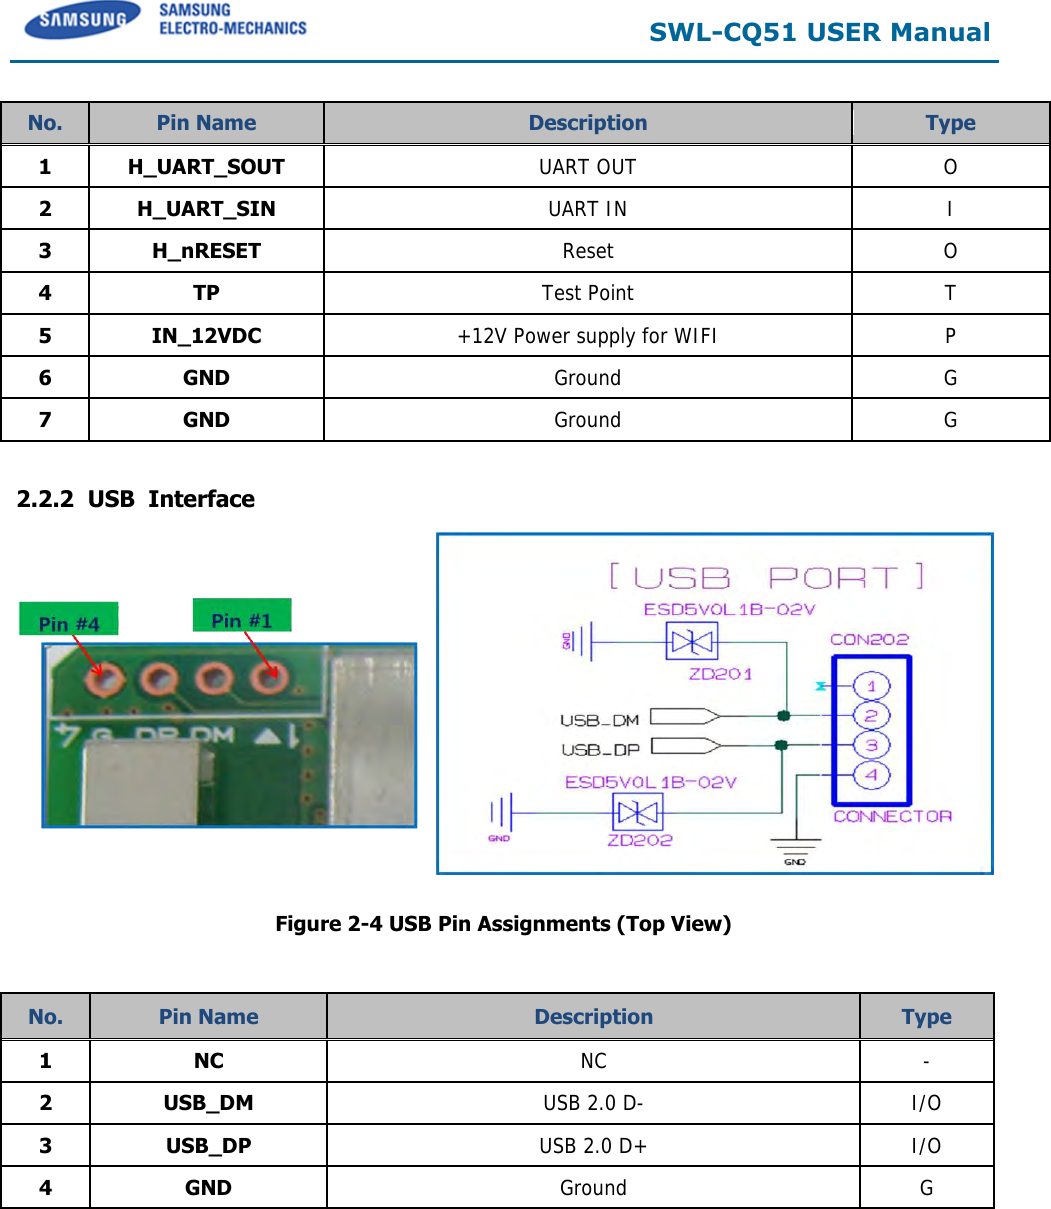  SWL-CQ51 USER Manual  No.  Pin Name  Description  Type  1 H_UART_SOUT UART OUT O 2 H_UART_SIN UART IN I 3 H_nRESET Reset O 4 TP Test Point T 5 IN_12VDC +12V Power supply for WIFI P 6 GND Ground G 7 GND Ground G  2.2.2  USB  Interface   Figure 2-4 USB Pin Assignments (Top View)  No.  Pin Name  Description  Type  1 NC NC - 2 USB_DM USB 2.0 D- I/O 3 USB_DP USB 2.0 D+ I/O 4 GND Ground G     